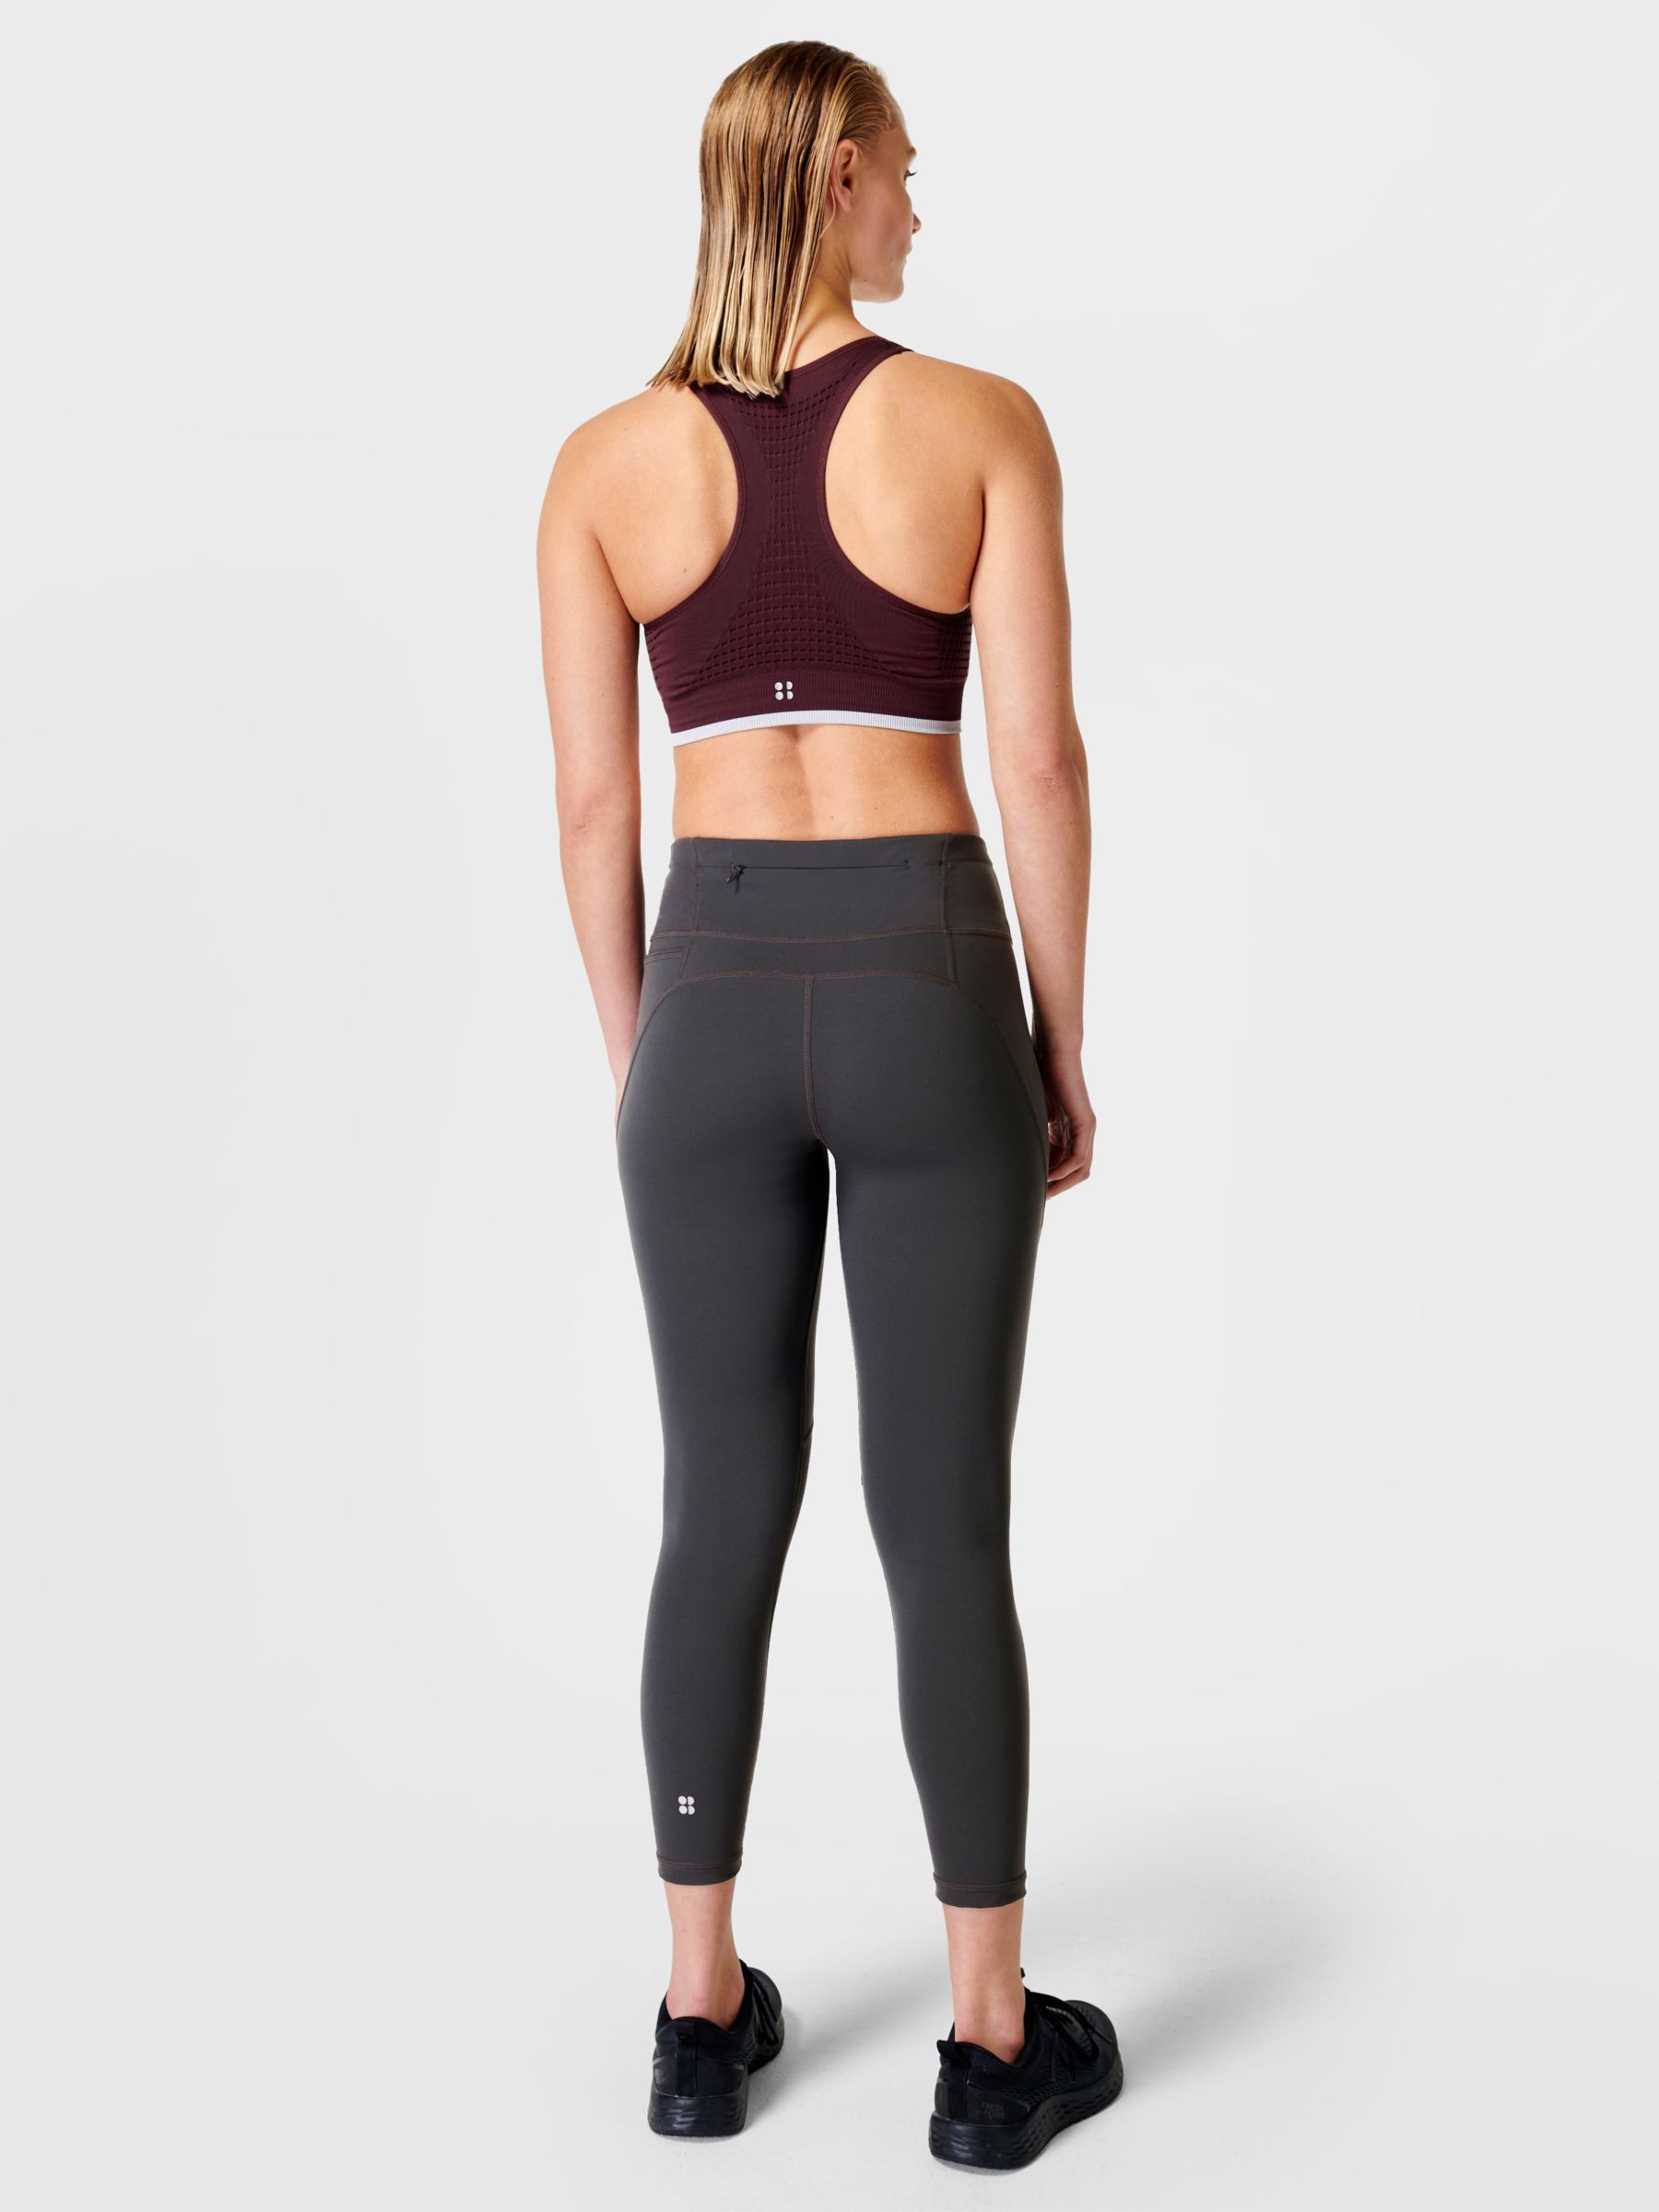 Sweaty Betty Power 7/8 Gym Leggings, Pink Scattered at John Lewis